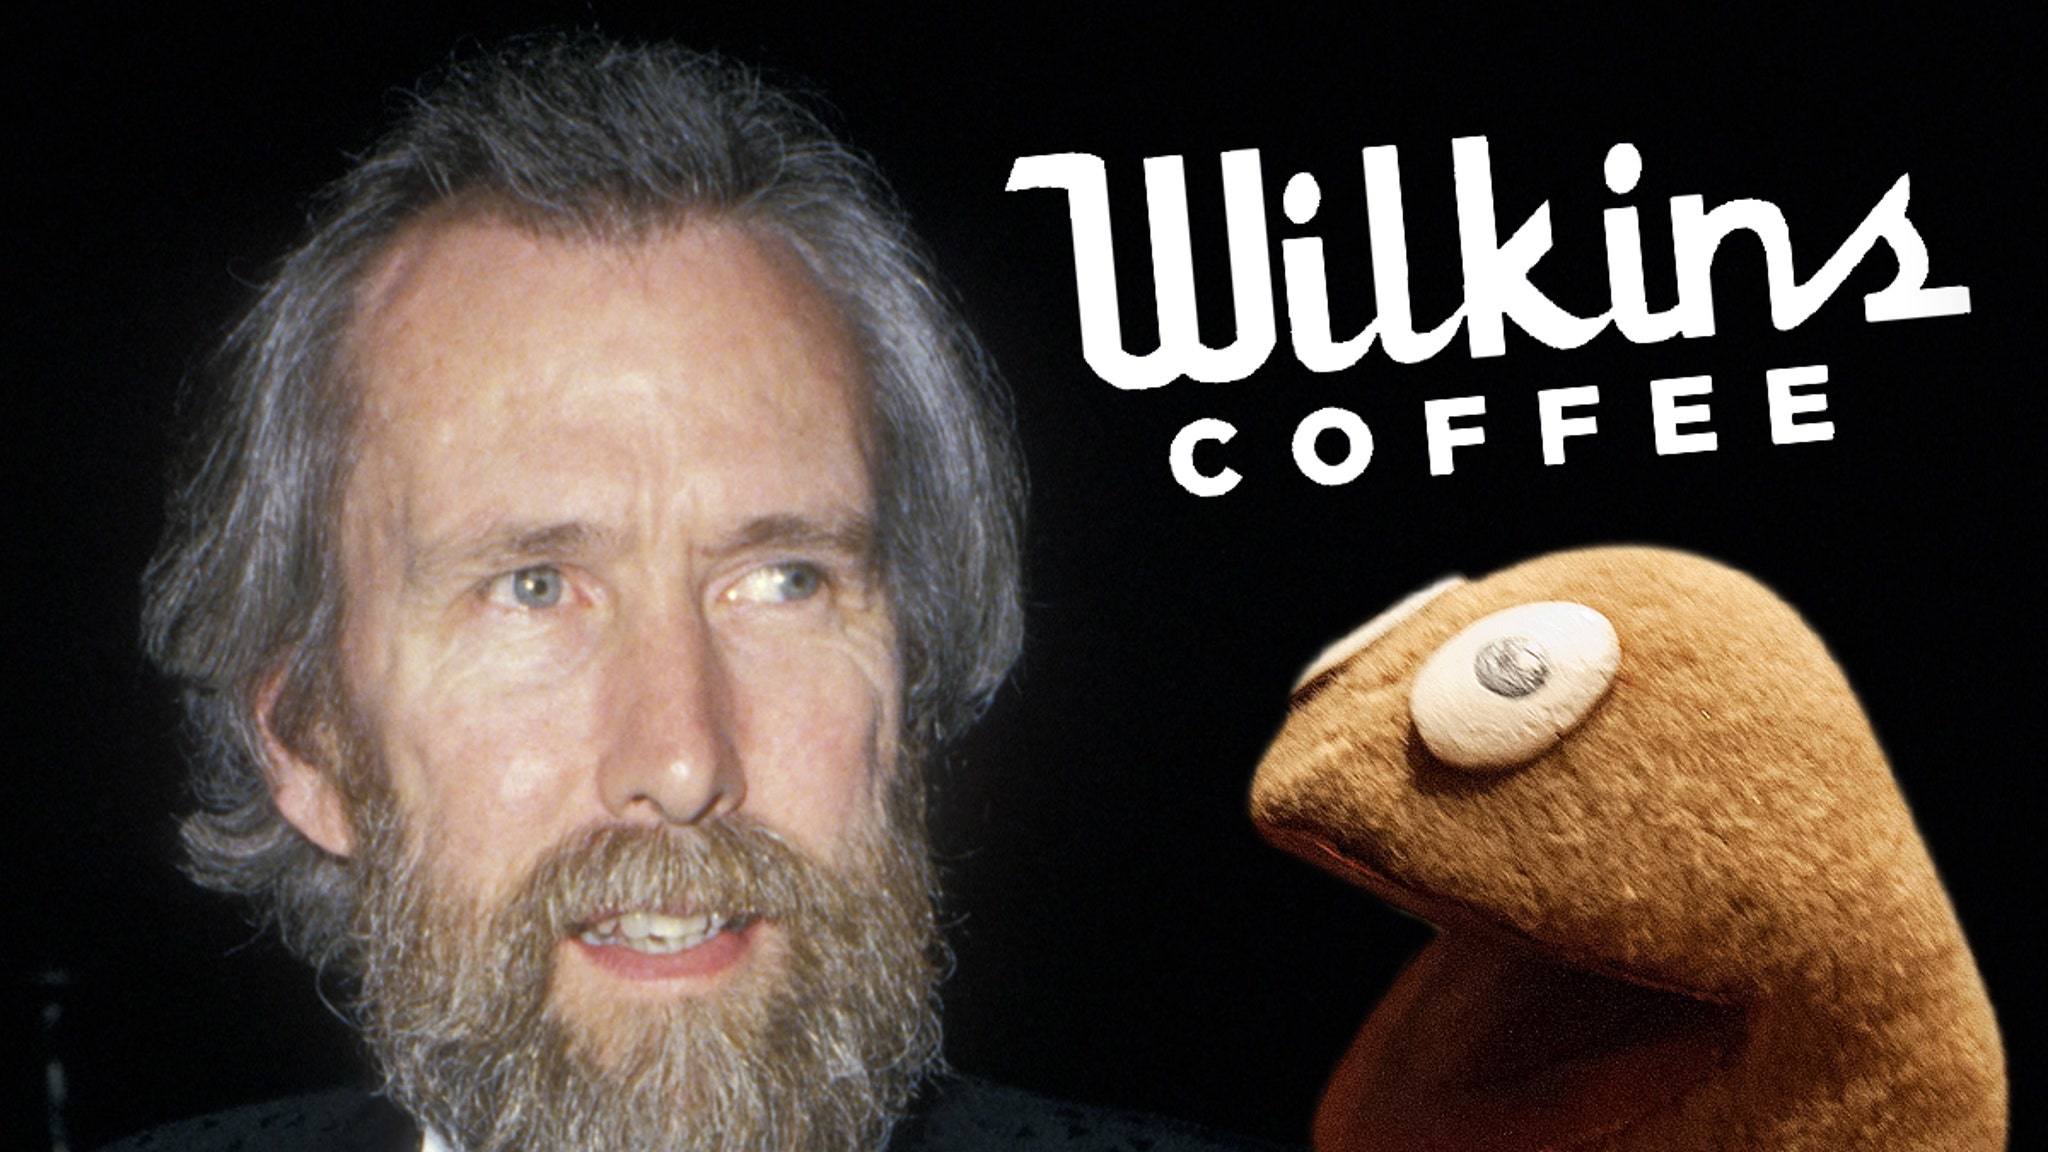 Jim Henson’s Old Wilkins coffee ads appear again, Boy Are They Dark